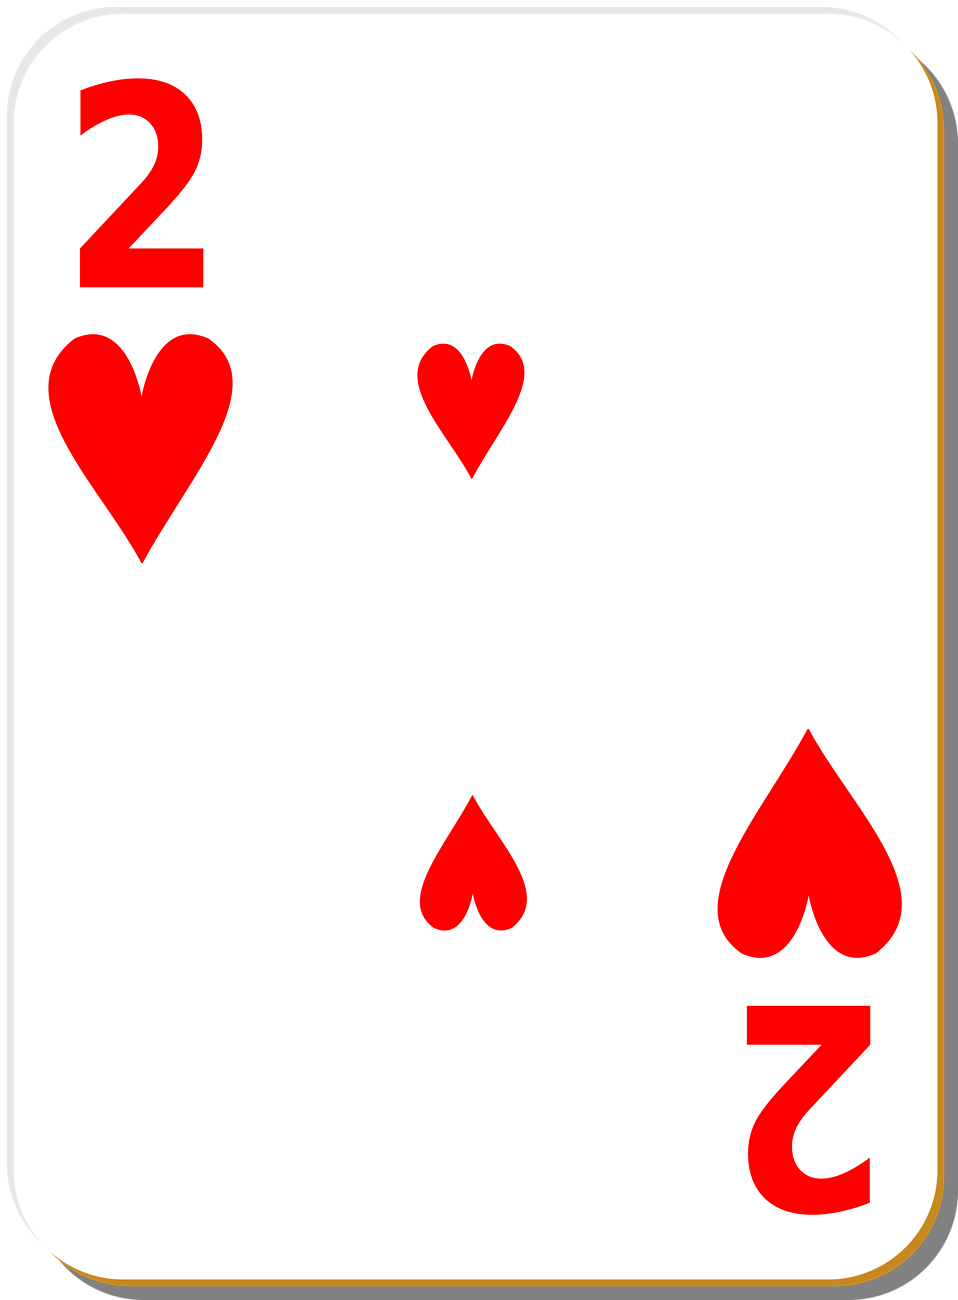 Hd images of deck of playing cards clipart